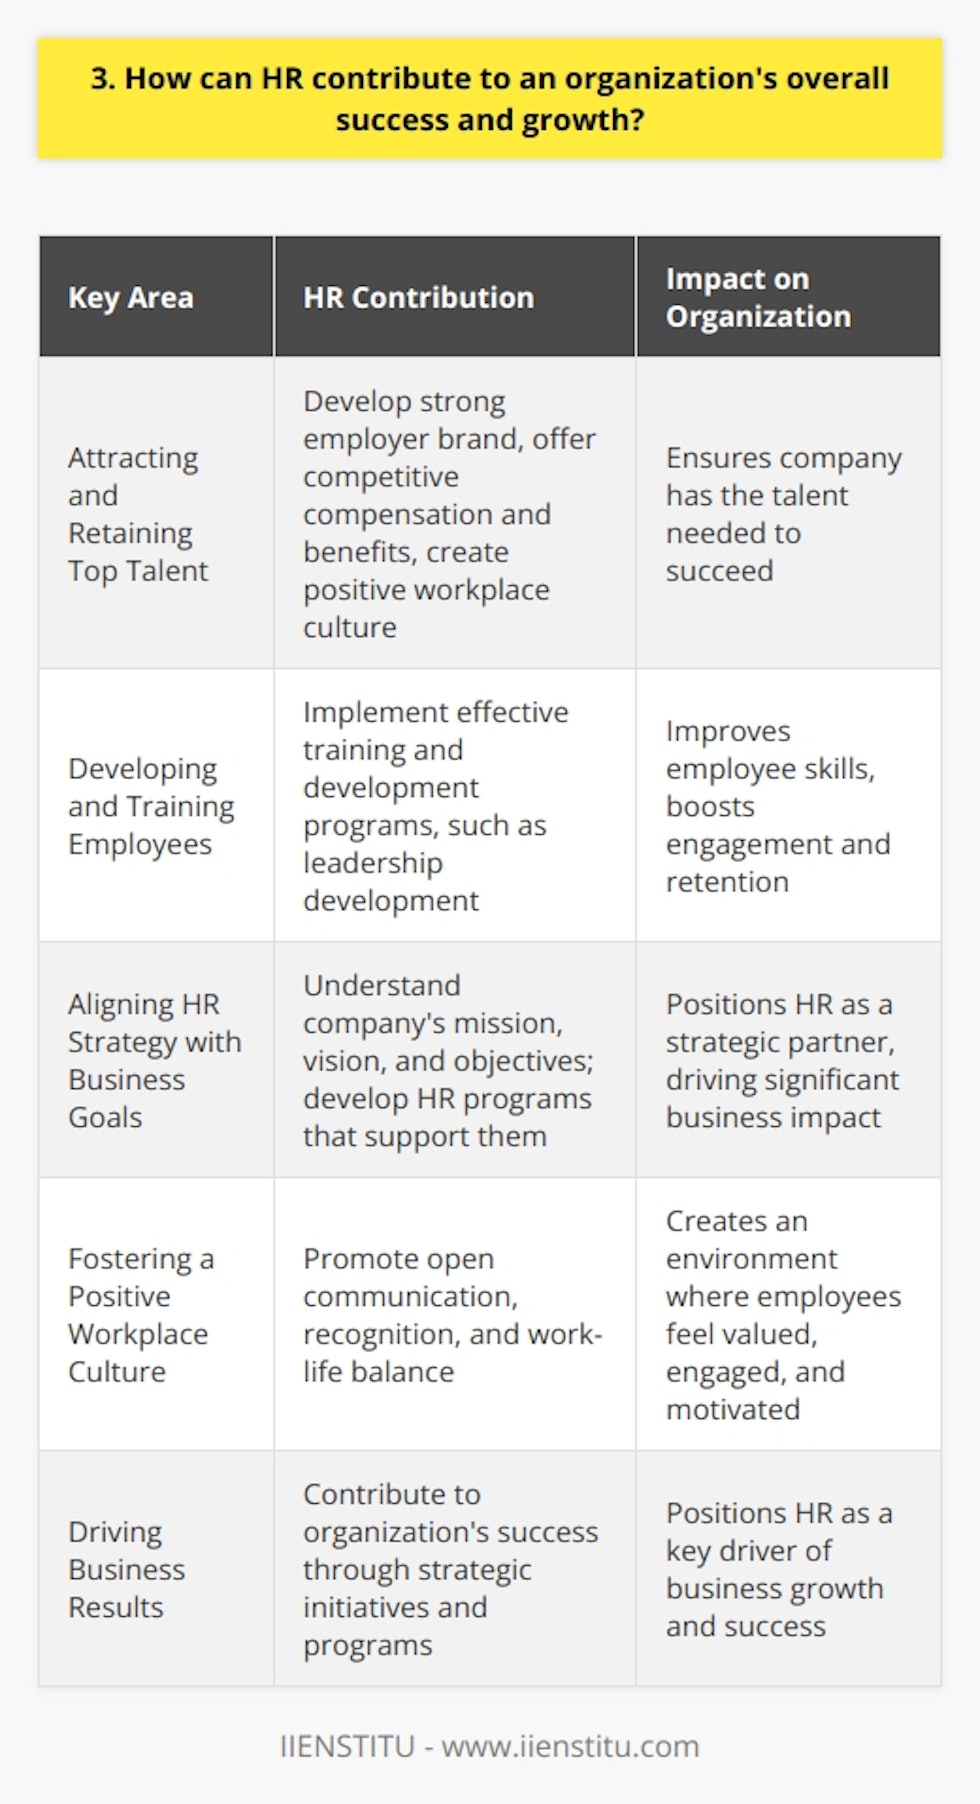 As an HR professional, I believe that the Human Resources department plays a crucial role in driving an organizations success and growth. HR can contribute in several key areas: Attracting and Retaining Top Talent Ive seen firsthand how a skilled HR team can help an organization attract the best and brightest employees. By developing a strong employer brand, offering competitive compensation and benefits, and creating a positive workplace culture, HR can help ensure that the company has the talent it needs to succeed. Developing and Training Employees Once the right people are in place, HR can help them reach their full potential through effective training and development programs. I remember a particularly successful leadership development program that I helped implement at my previous company. It not only improved the skills of our managers but also boosted employee engagement and retention. Aligning HR Strategy with Business Goals To truly contribute to an organizations success, HR must align its strategies and initiatives with the overall business goals. This means understanding the companys mission, vision, and objectives, and developing HR programs that support them. In my experience, when HR is a strategic partner to the business, the impact can be significant. Fostering a Positive Workplace Culture Finally, I believe that HR plays a vital role in creating and maintaining a positive workplace culture. By promoting open communication, recognition, and work-life balance, HR can help create an environment where employees feel valued, engaged, and motivated to do their best work. In conclusion, I am passionate about the ways in which HR can contribute to an organizations success and growth. From attracting top talent to fostering a positive culture, HR is a key driver of business results.